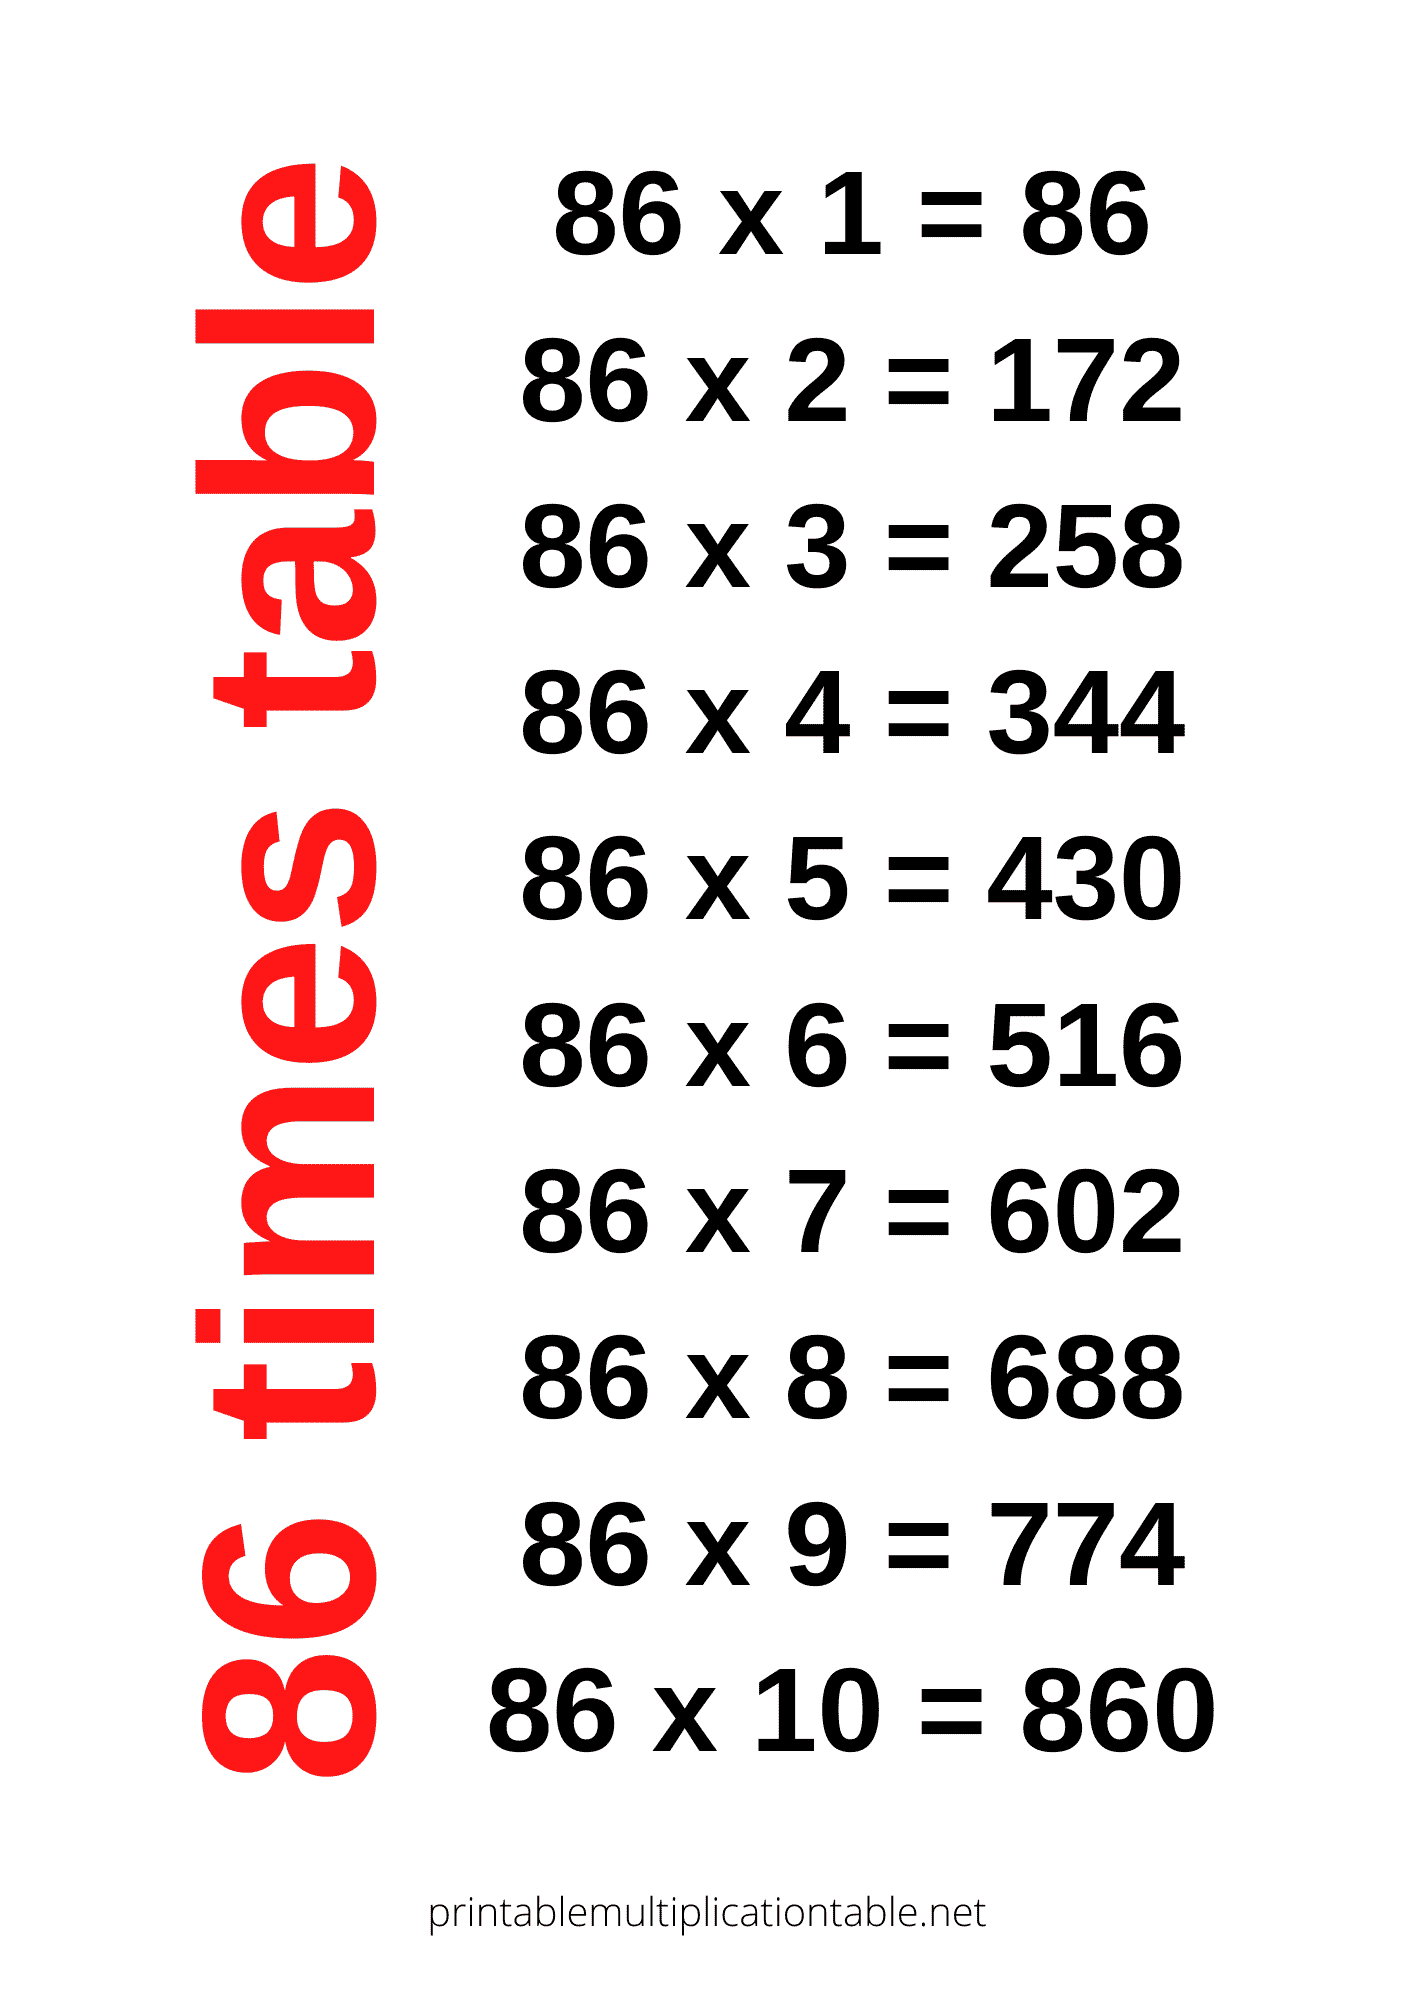 86 times table chart